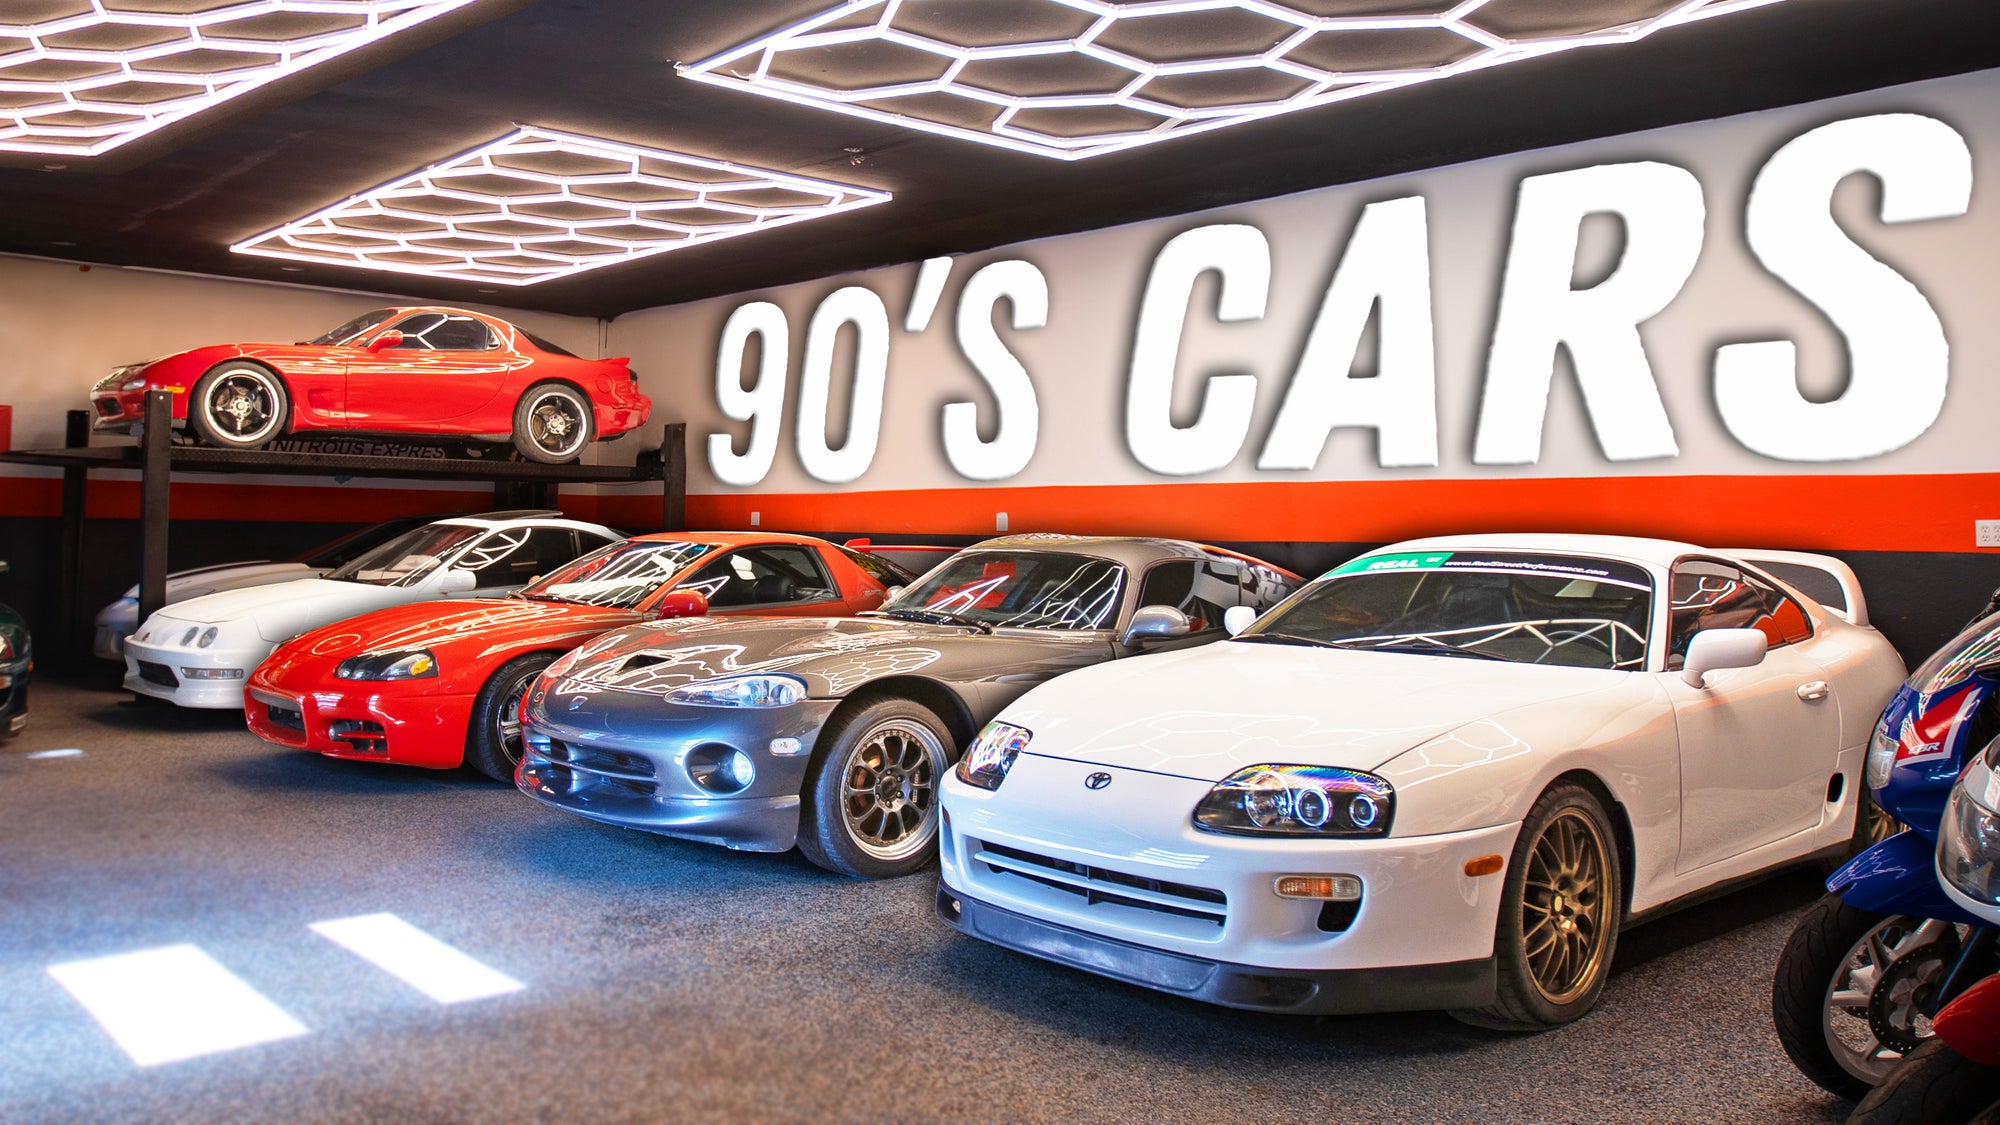 He's Collecting all the ICONIC Cars from the 1990's (JRODS Garage)